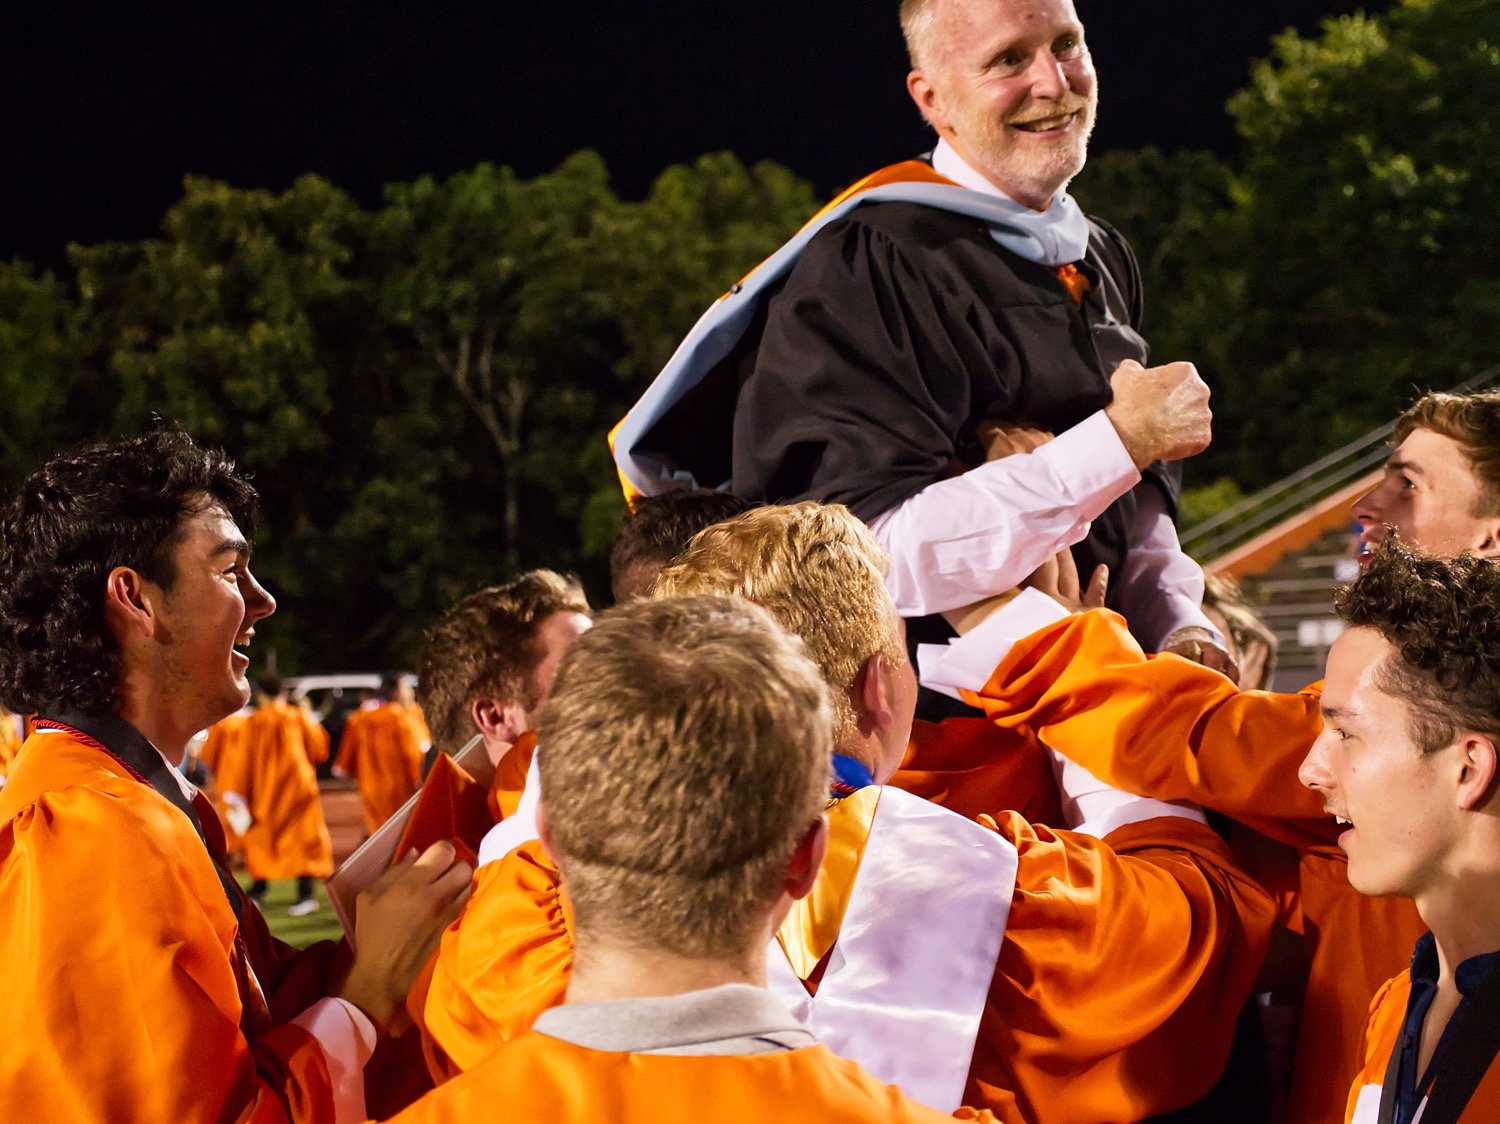 Mineola grads lift Principal David Sauer onto their shoulders following Friday’s graduation ceremony. Sauer will be moving to central administration and the Class of 2020 is his last one at MHS.